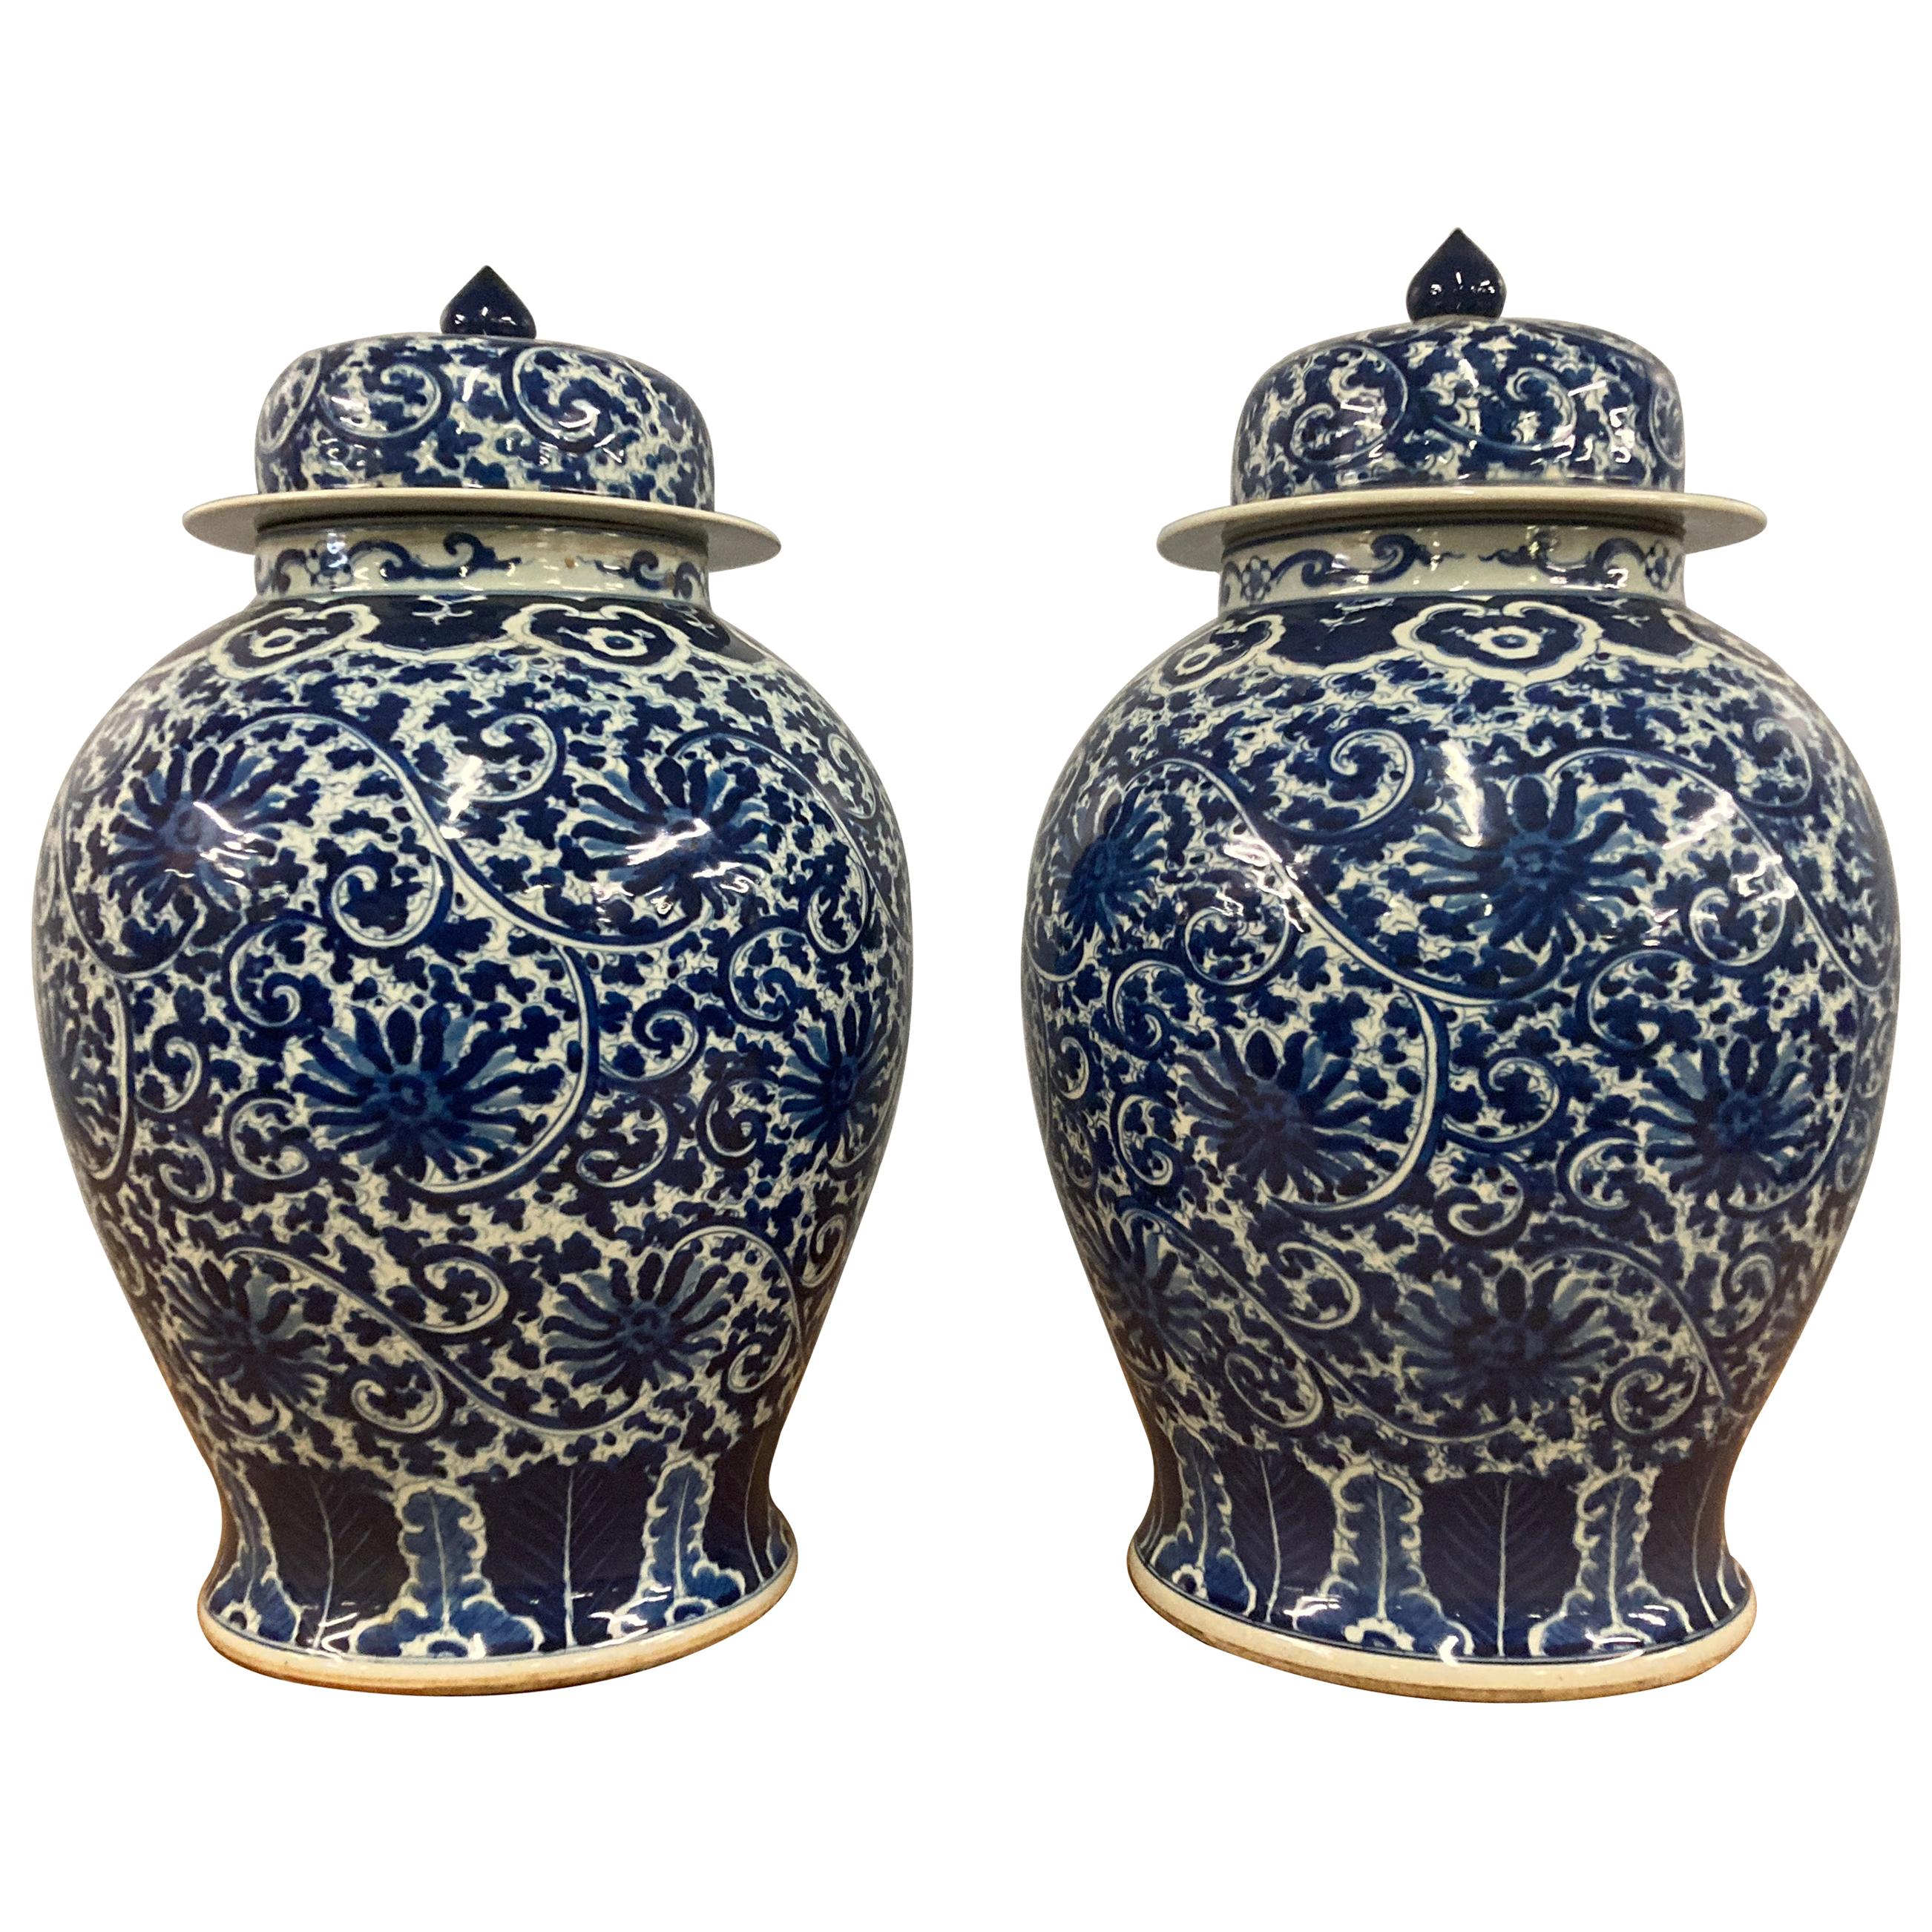 Pair of Chinese Blue and White Porcelain Ginger Jars from the Late 20th Century